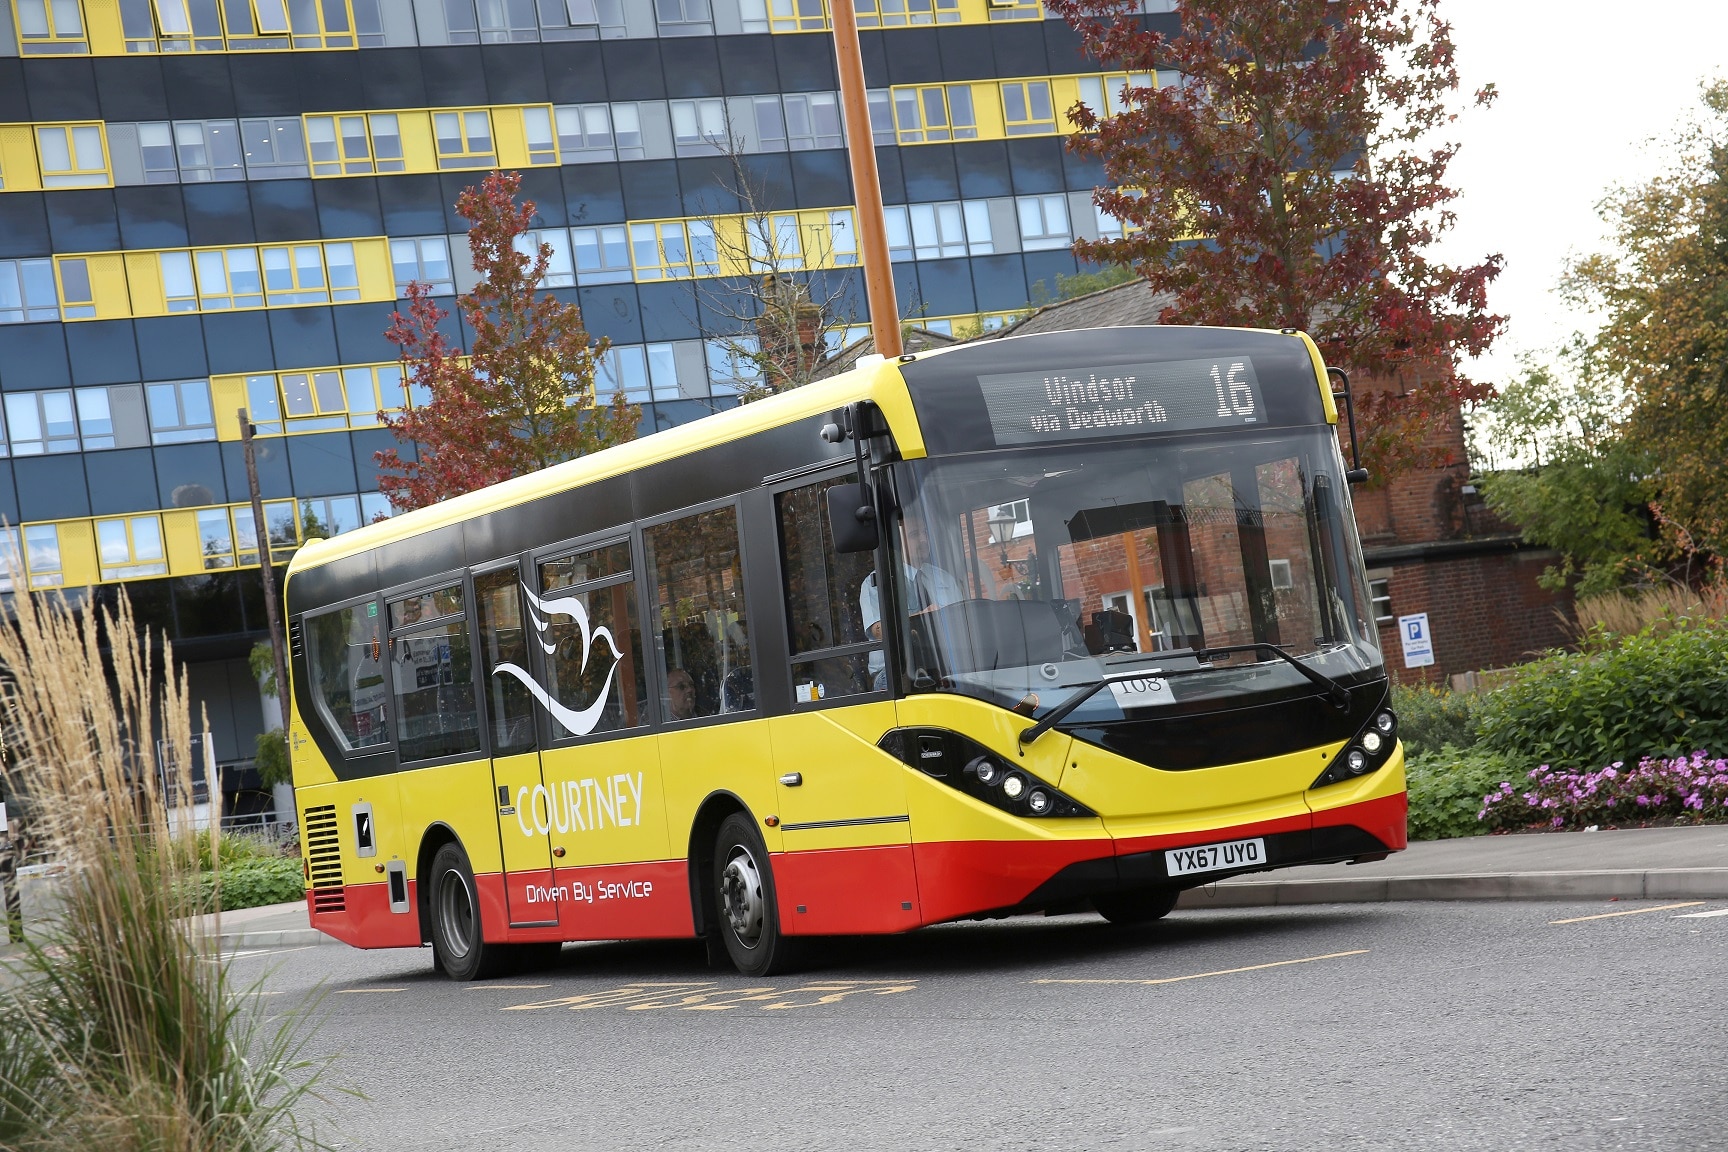 DfT tell bus operators in England that an average 80% service level is expected